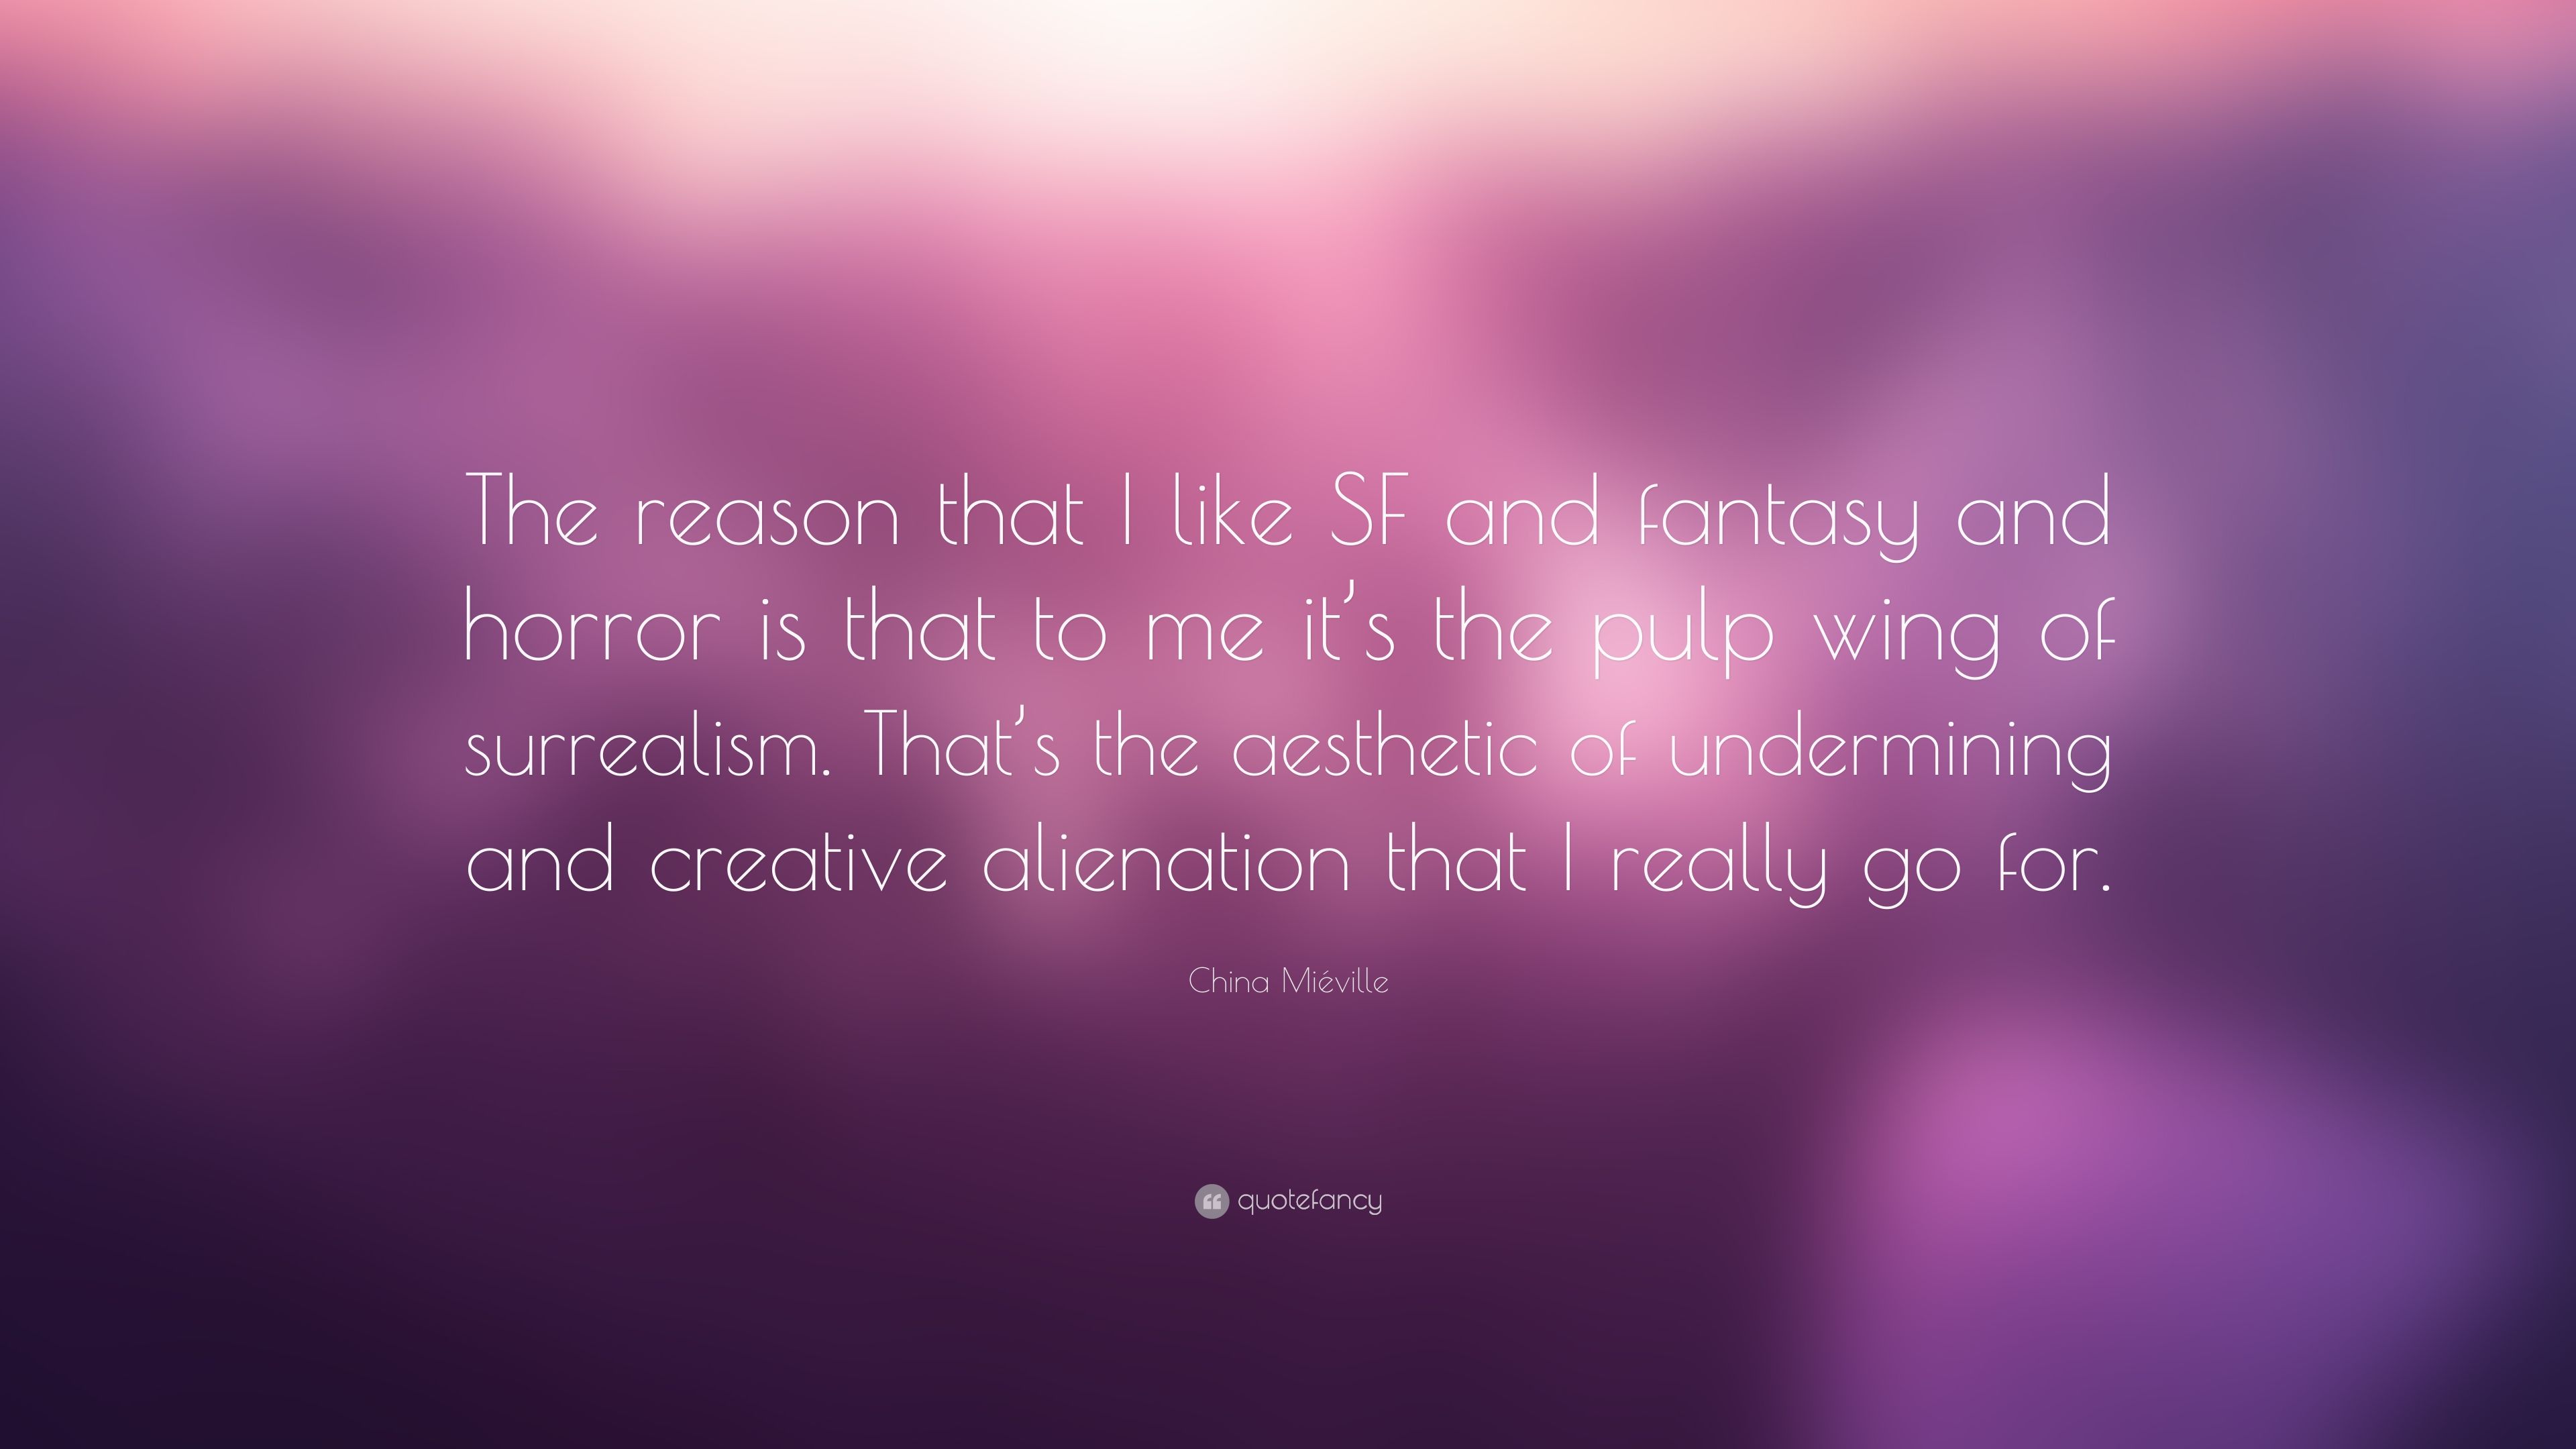 China Miéville Quote: “The reason that I like SF and fantasy